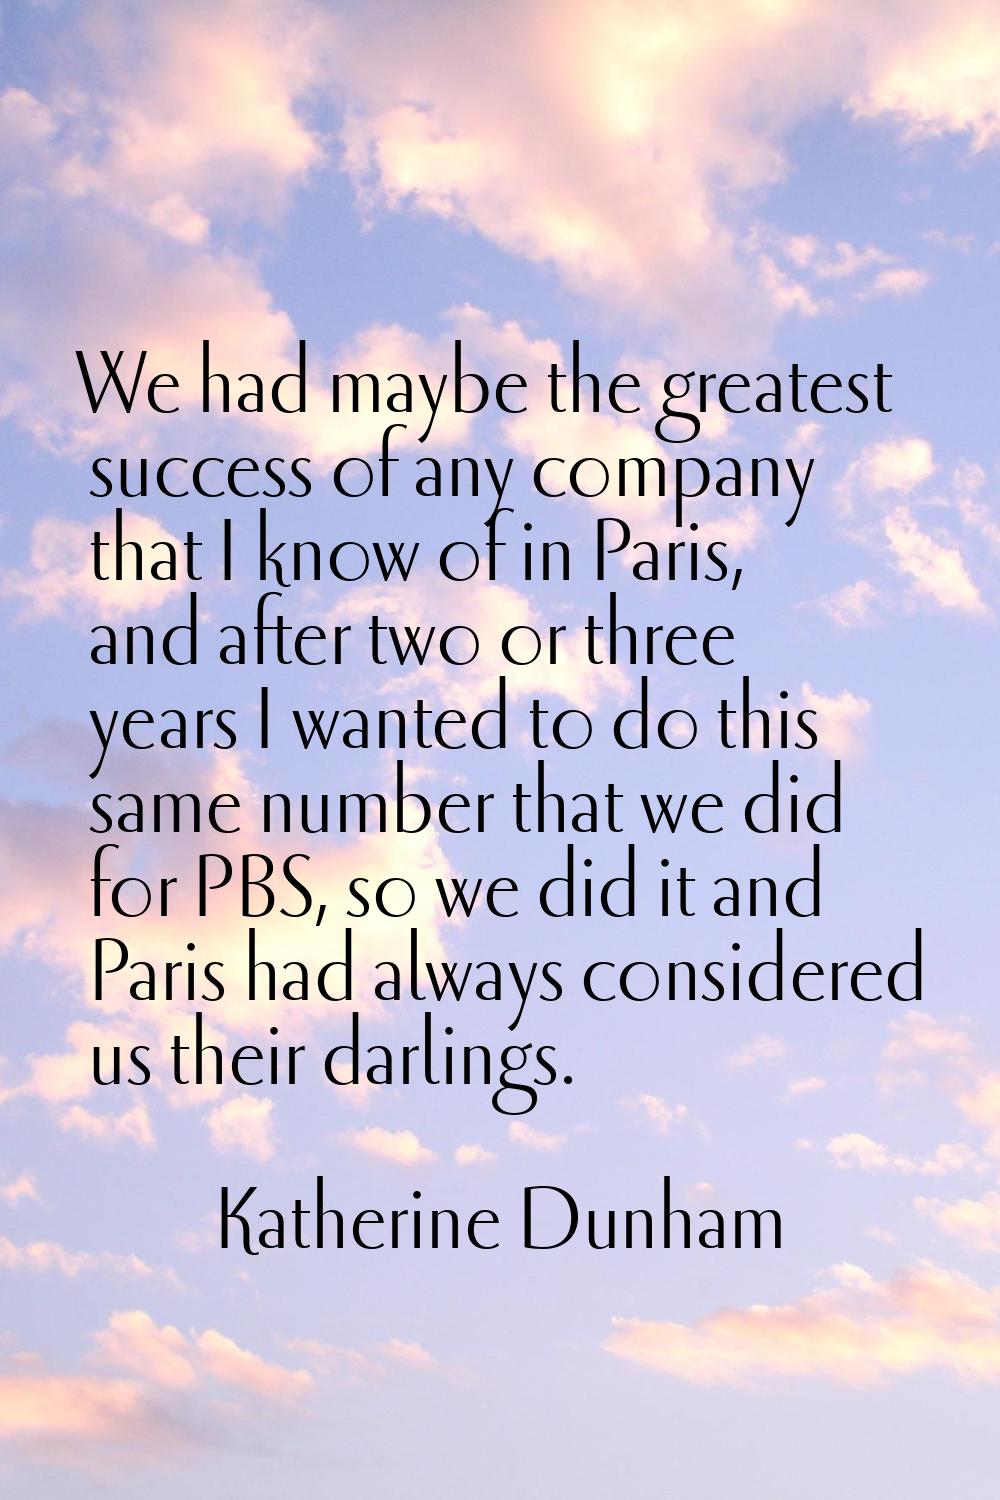 We had maybe the greatest success of any company that I know of in Paris, and after two or three ye